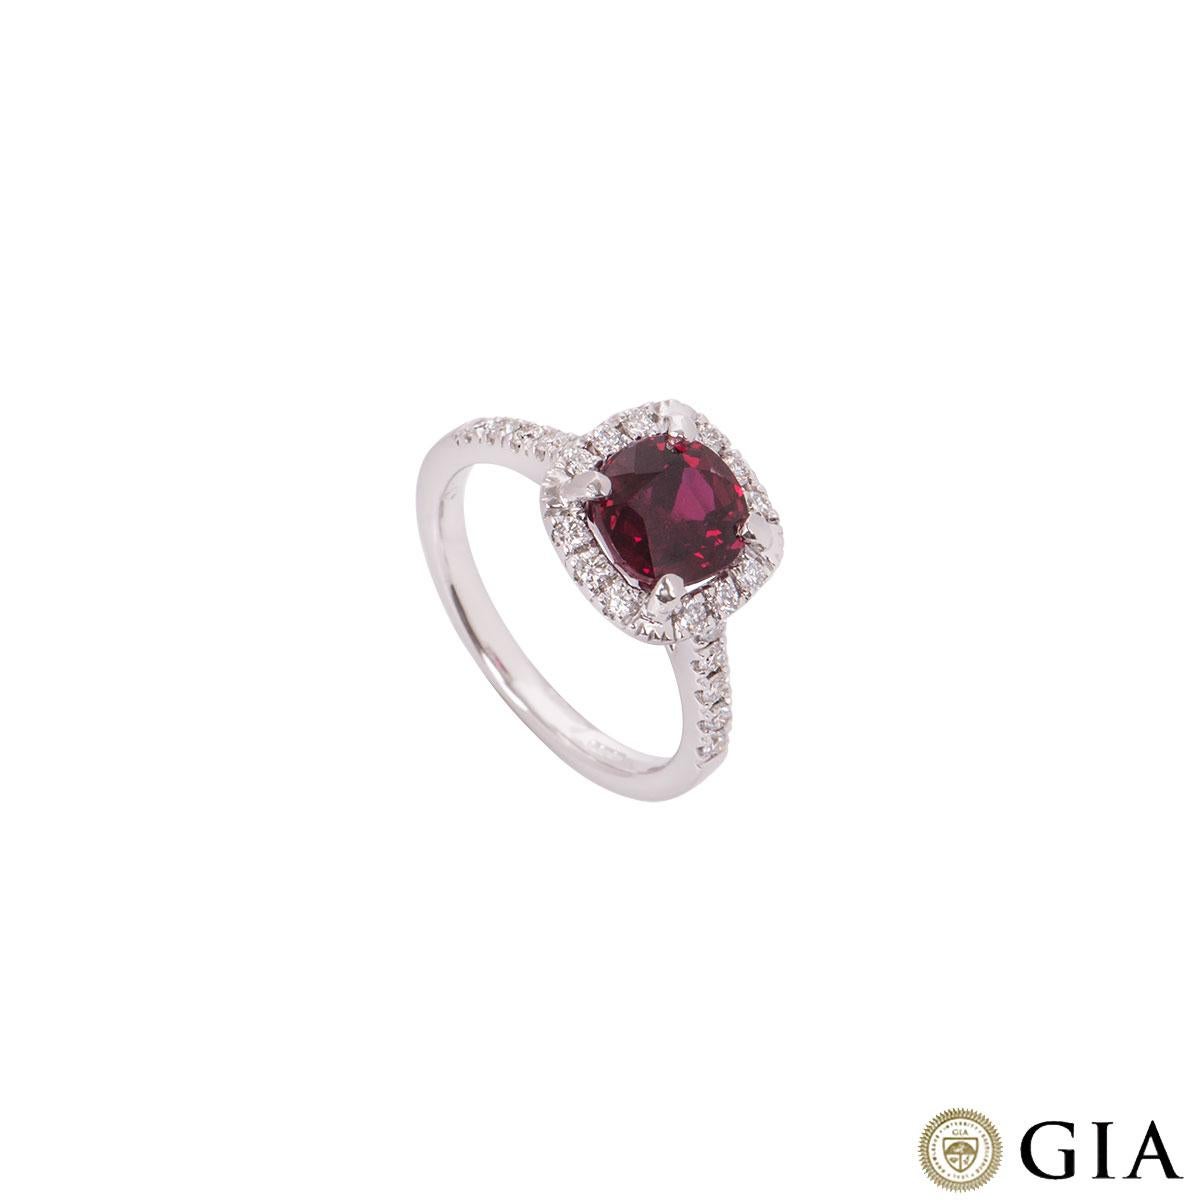 An 18k white gold diamond and ruby ring. The ring comprises of a cushion cut ruby in a four claw setting in the centre with round brilliant cut diamonds in a halo setting and on the shoulders. The ruby has a weight of 2.54ct and the diamonds have a